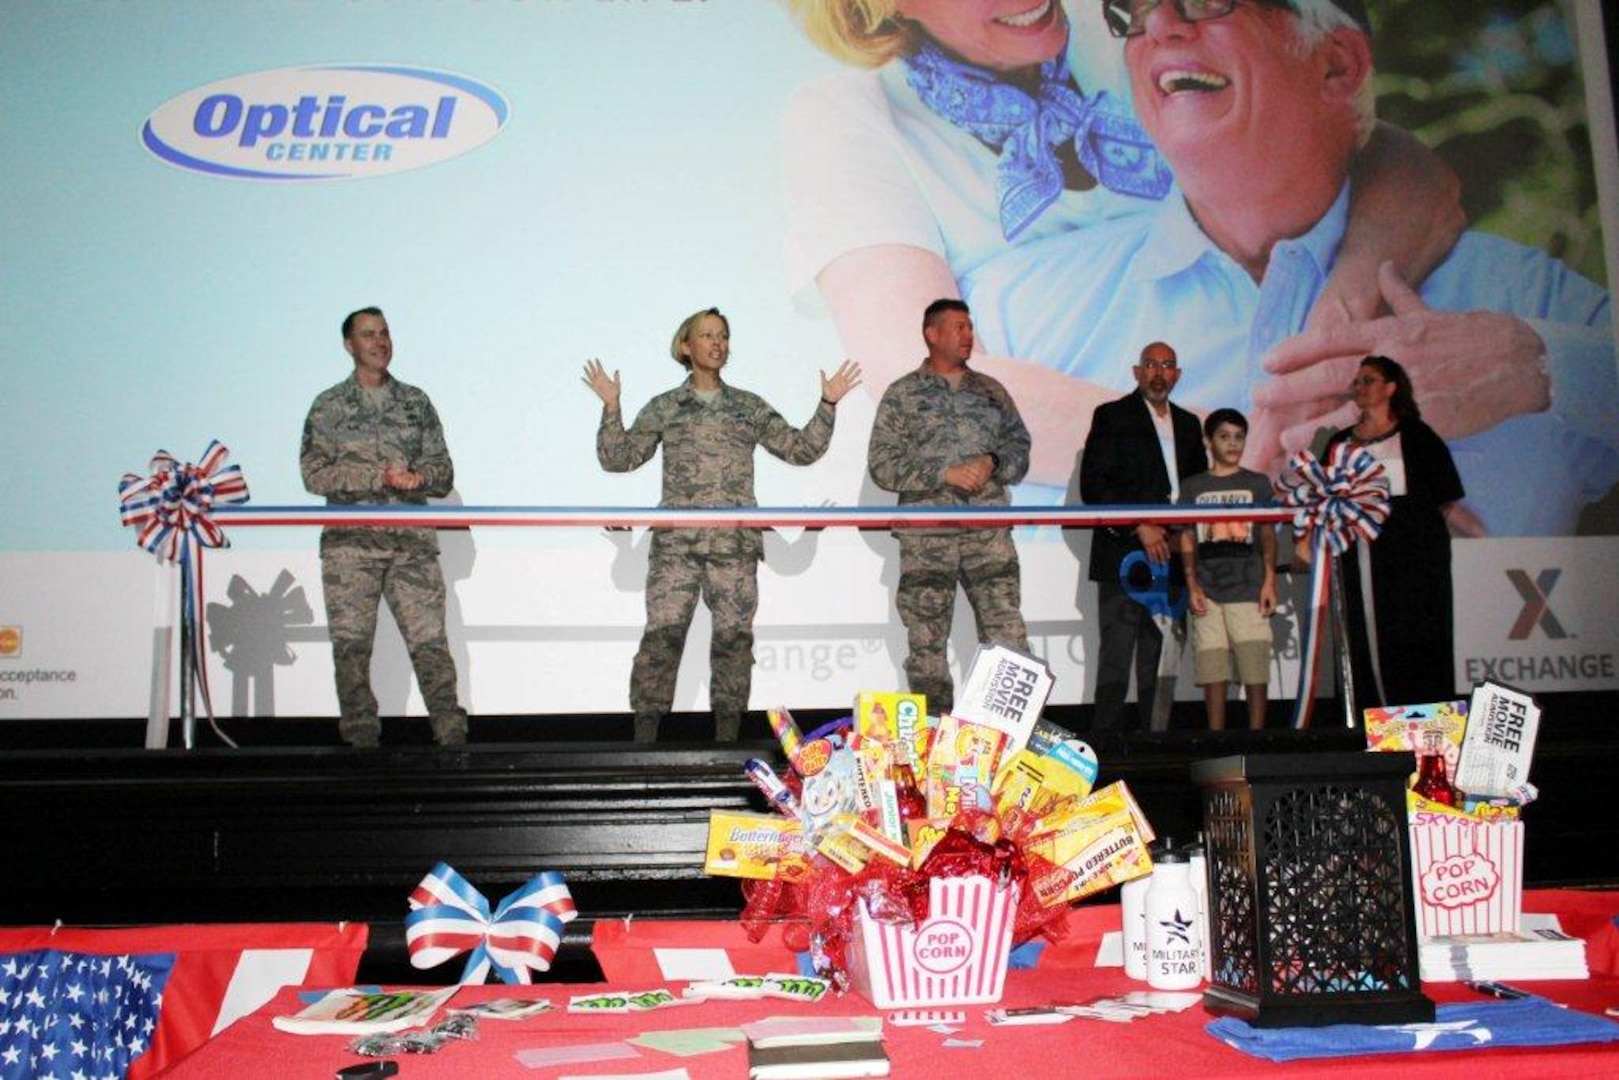 Nearly one year after its reopening, the Taj Mahal movie theater in Fleenor Auditorium is again enjoying success as an entertainment destination for the Joint Base San Antonio-Randolph community.